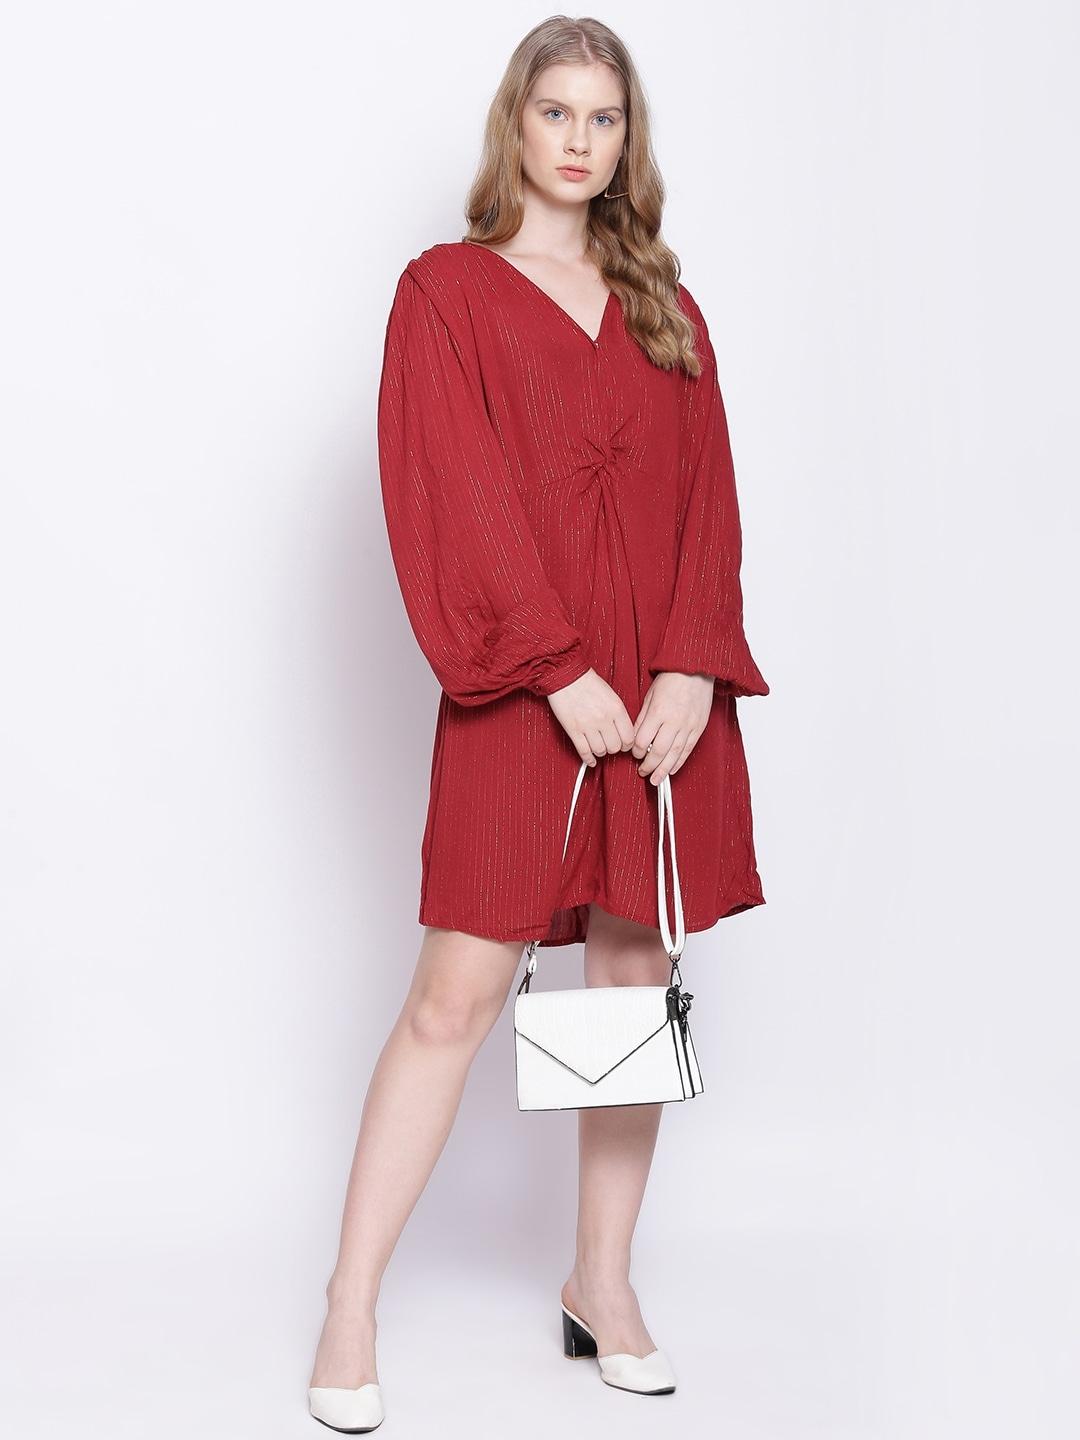 oxolloxo red crepe dress